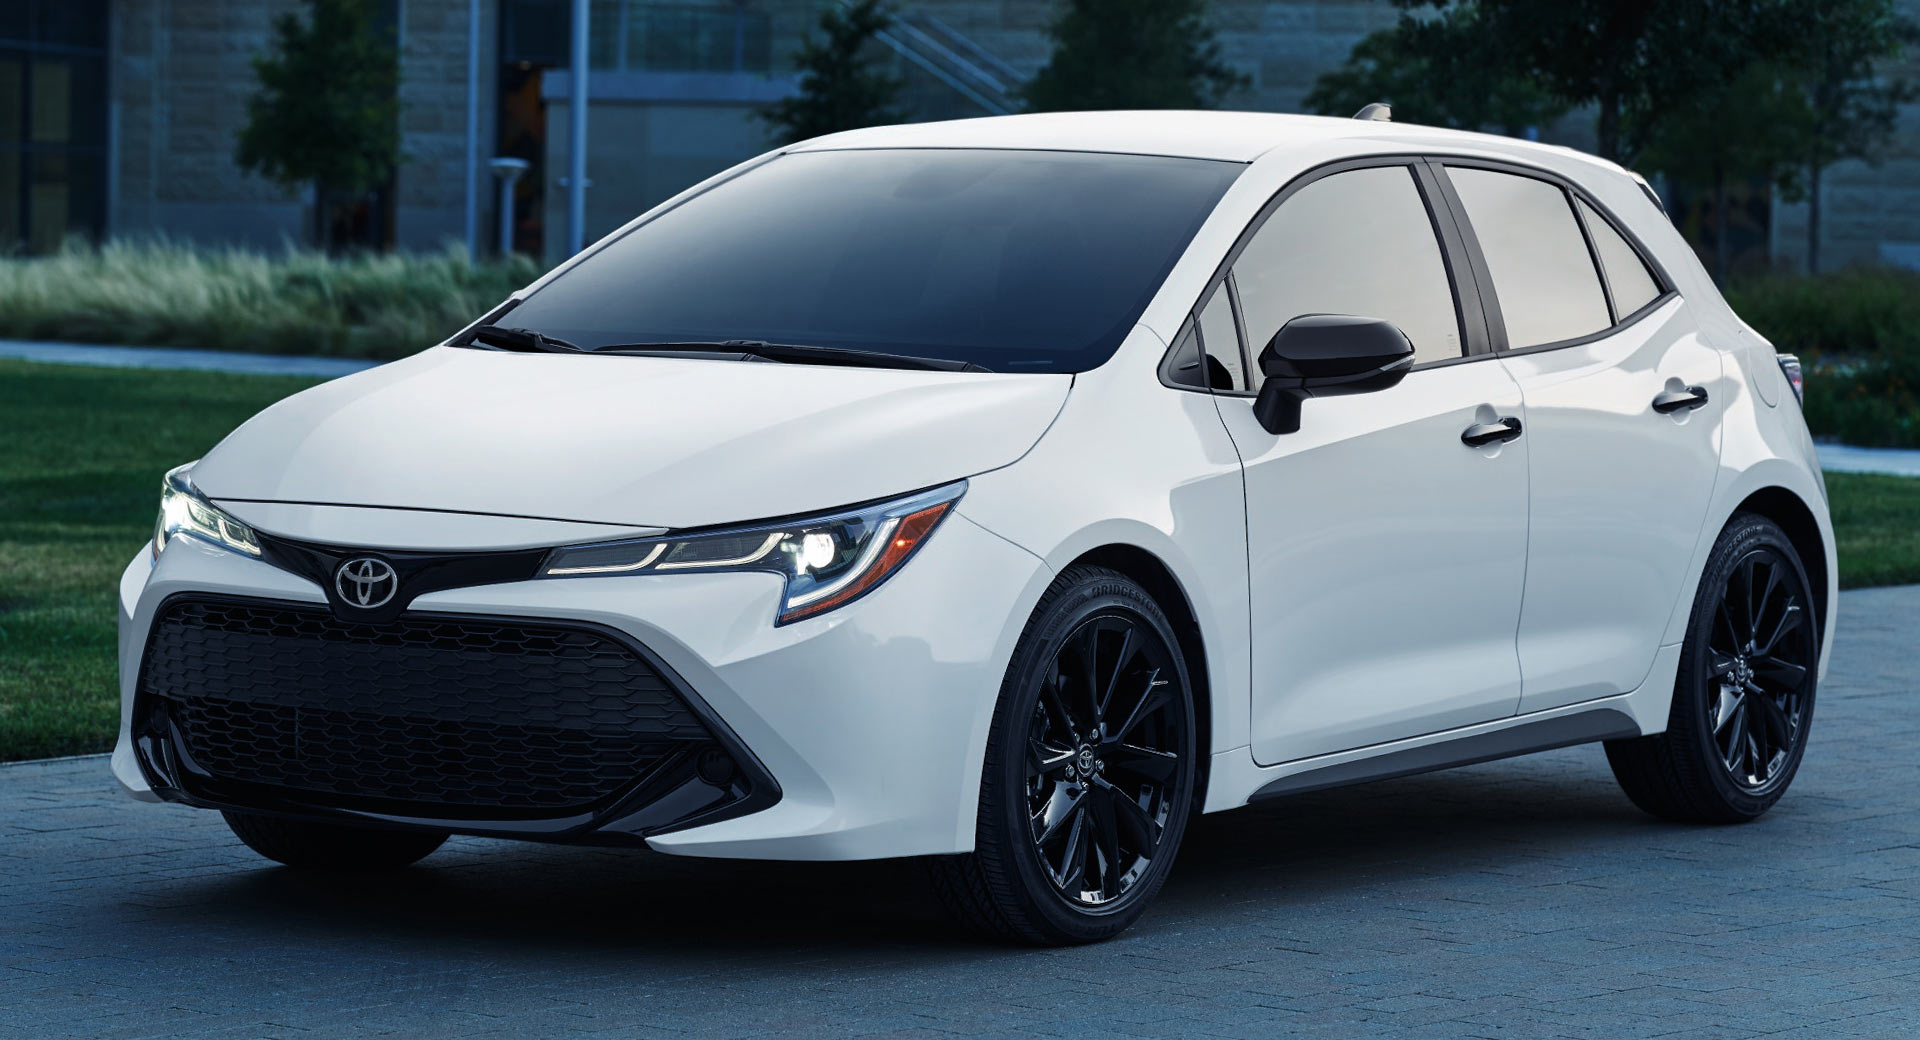 2020 Toyota Corolla Goes To The Dark Side With New